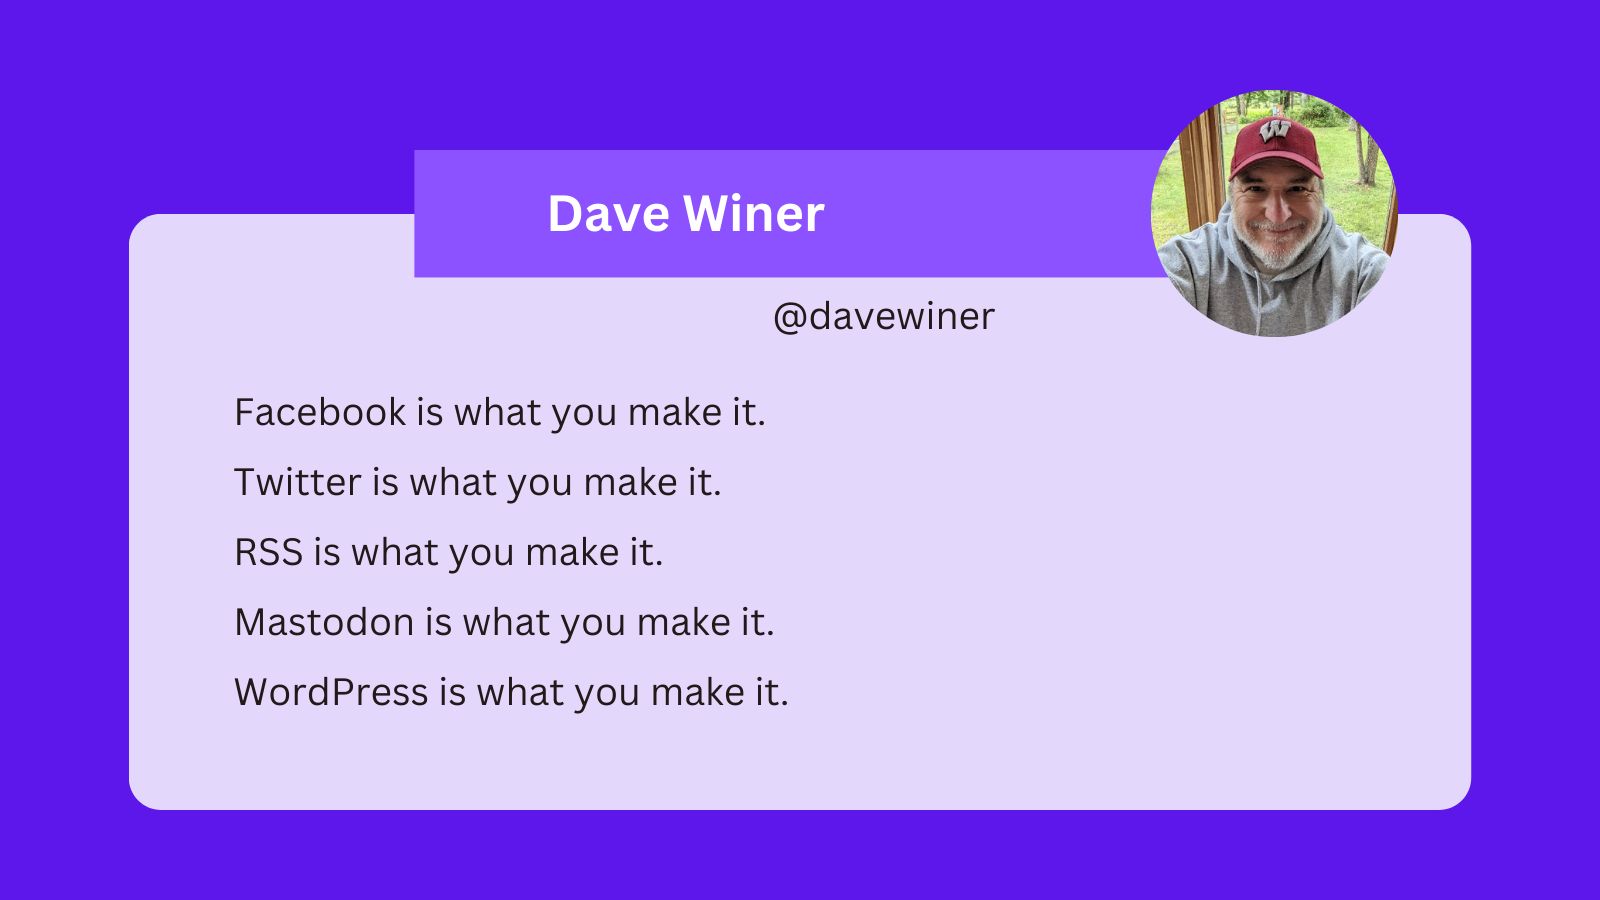 A tweet from Dave Winer that says: Facebook is what you make it. Twitter is what you make it. RSS is what you make it. Mastodon is what you make it. WordPress is what you make it.